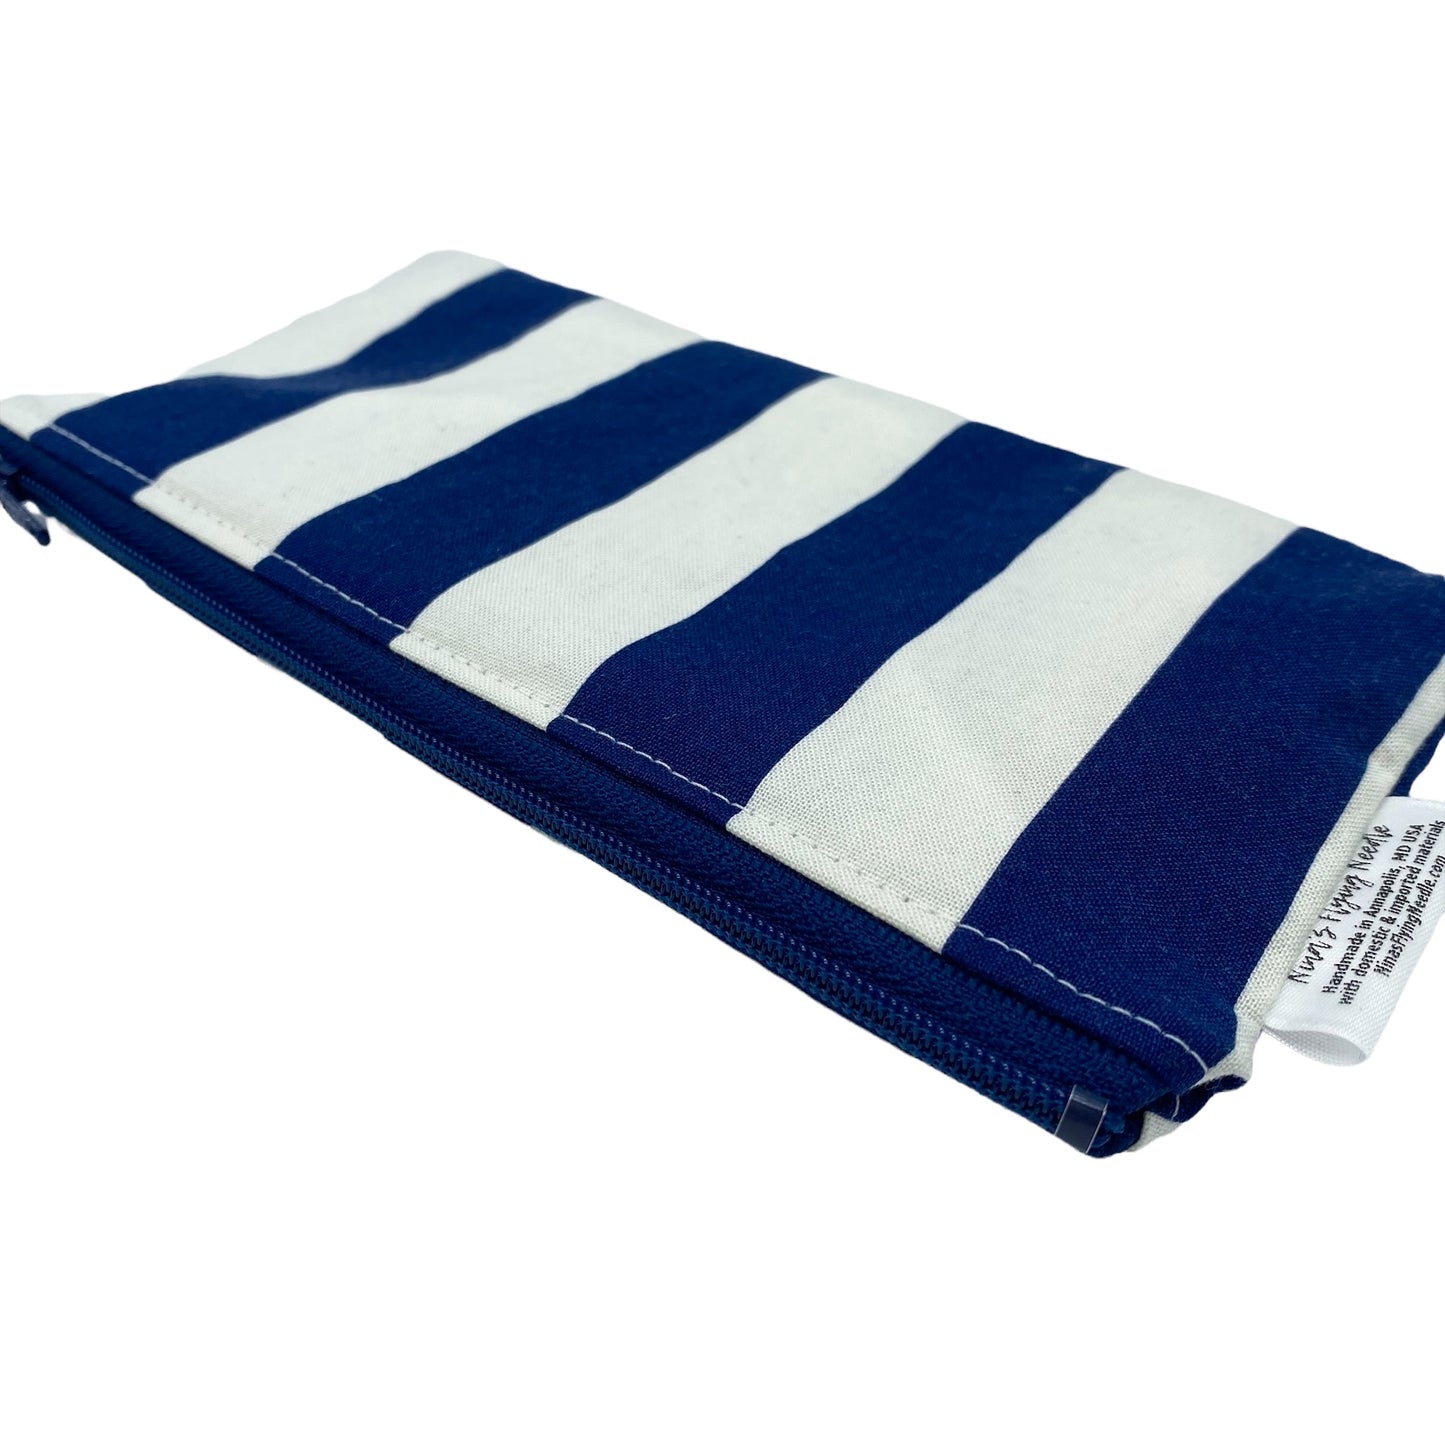 Knick Knack Sized Reusable Zippered Bag Block Stripes Thick